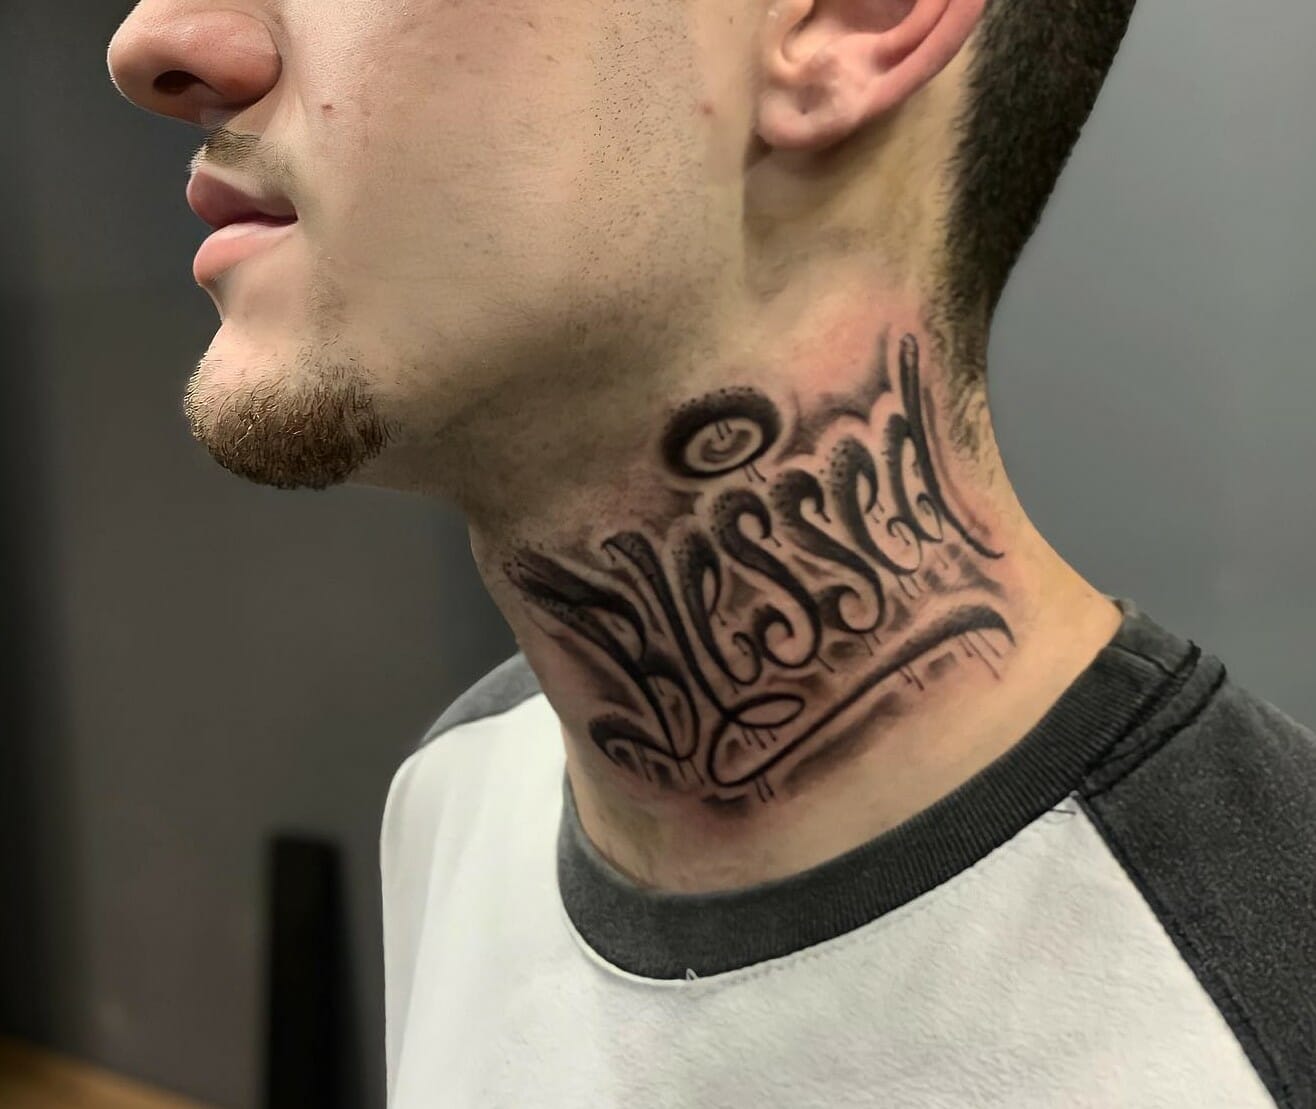 101 Best Blessed Neck Tattoo Ideas That Will Blow Your Mind! - Outsons